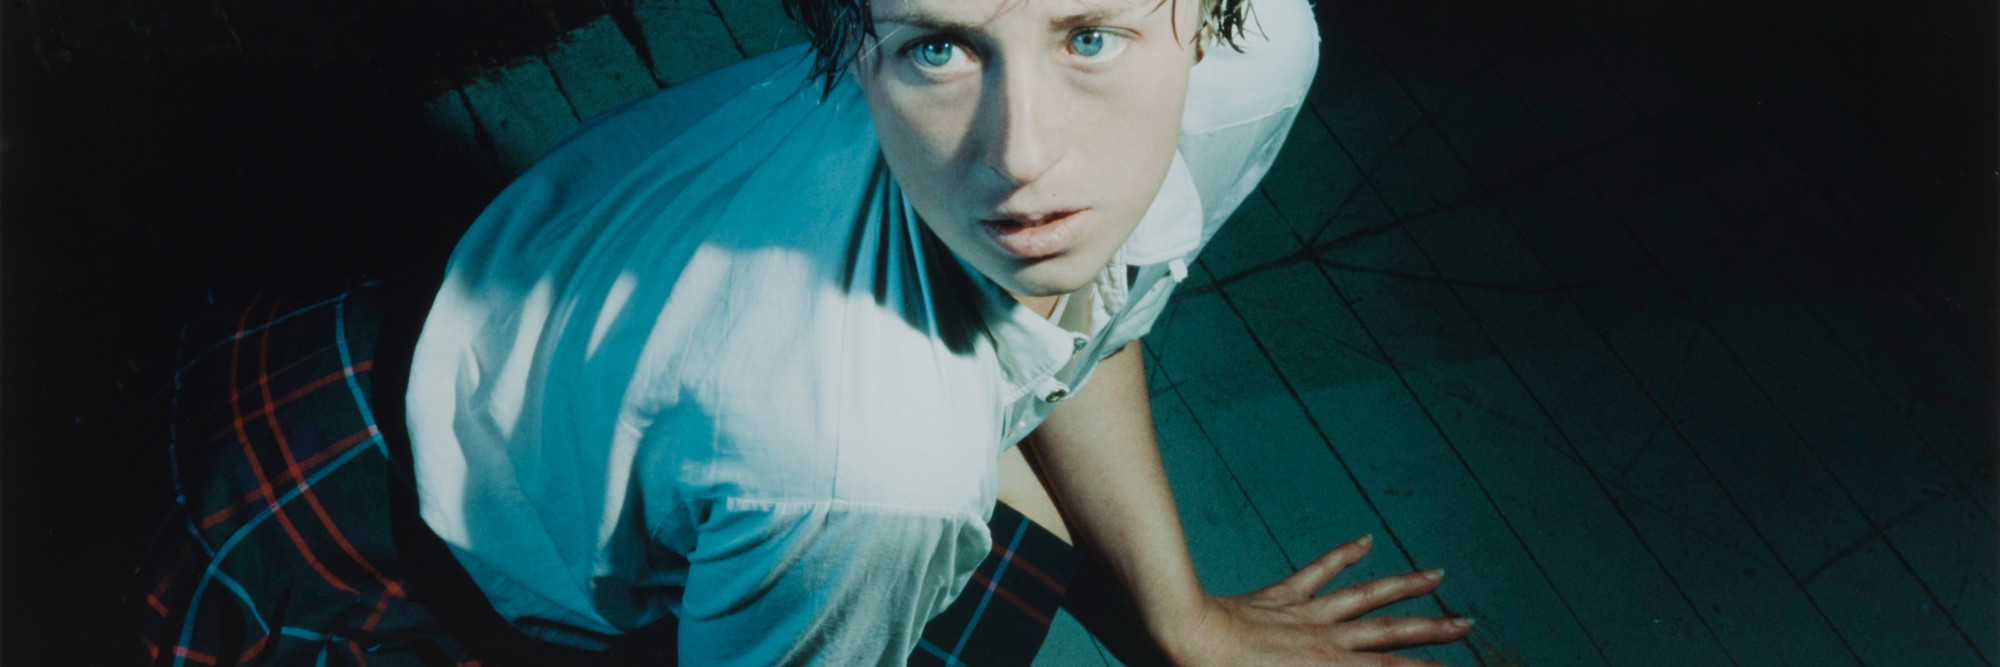 Cindy Sherman. Untitled #92. 1981. Chromogenic color print, 24 × 47 15/16″ (61 × 121.9 cm)The Museum of Modern Art, New York. The Fellows of Photography Fund. © 2010 Cindy Sherman